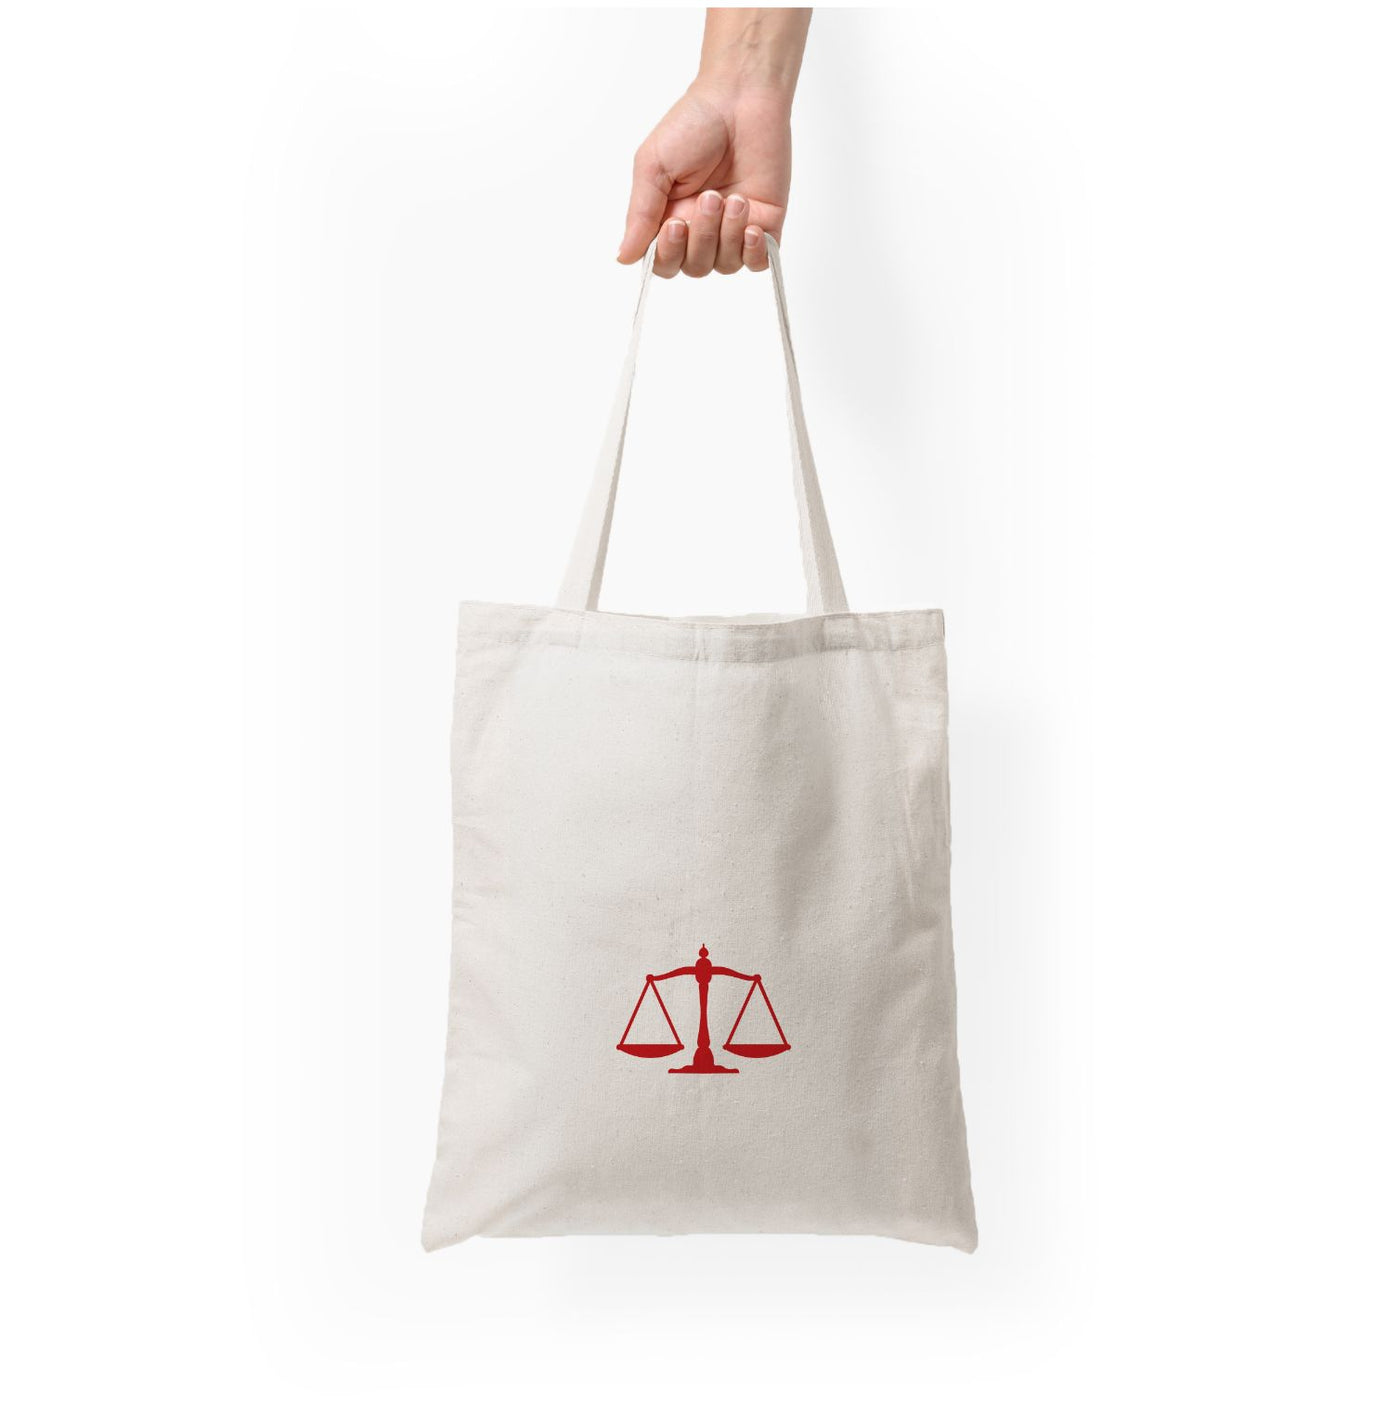 Scale - Better Call Saul Tote Bag